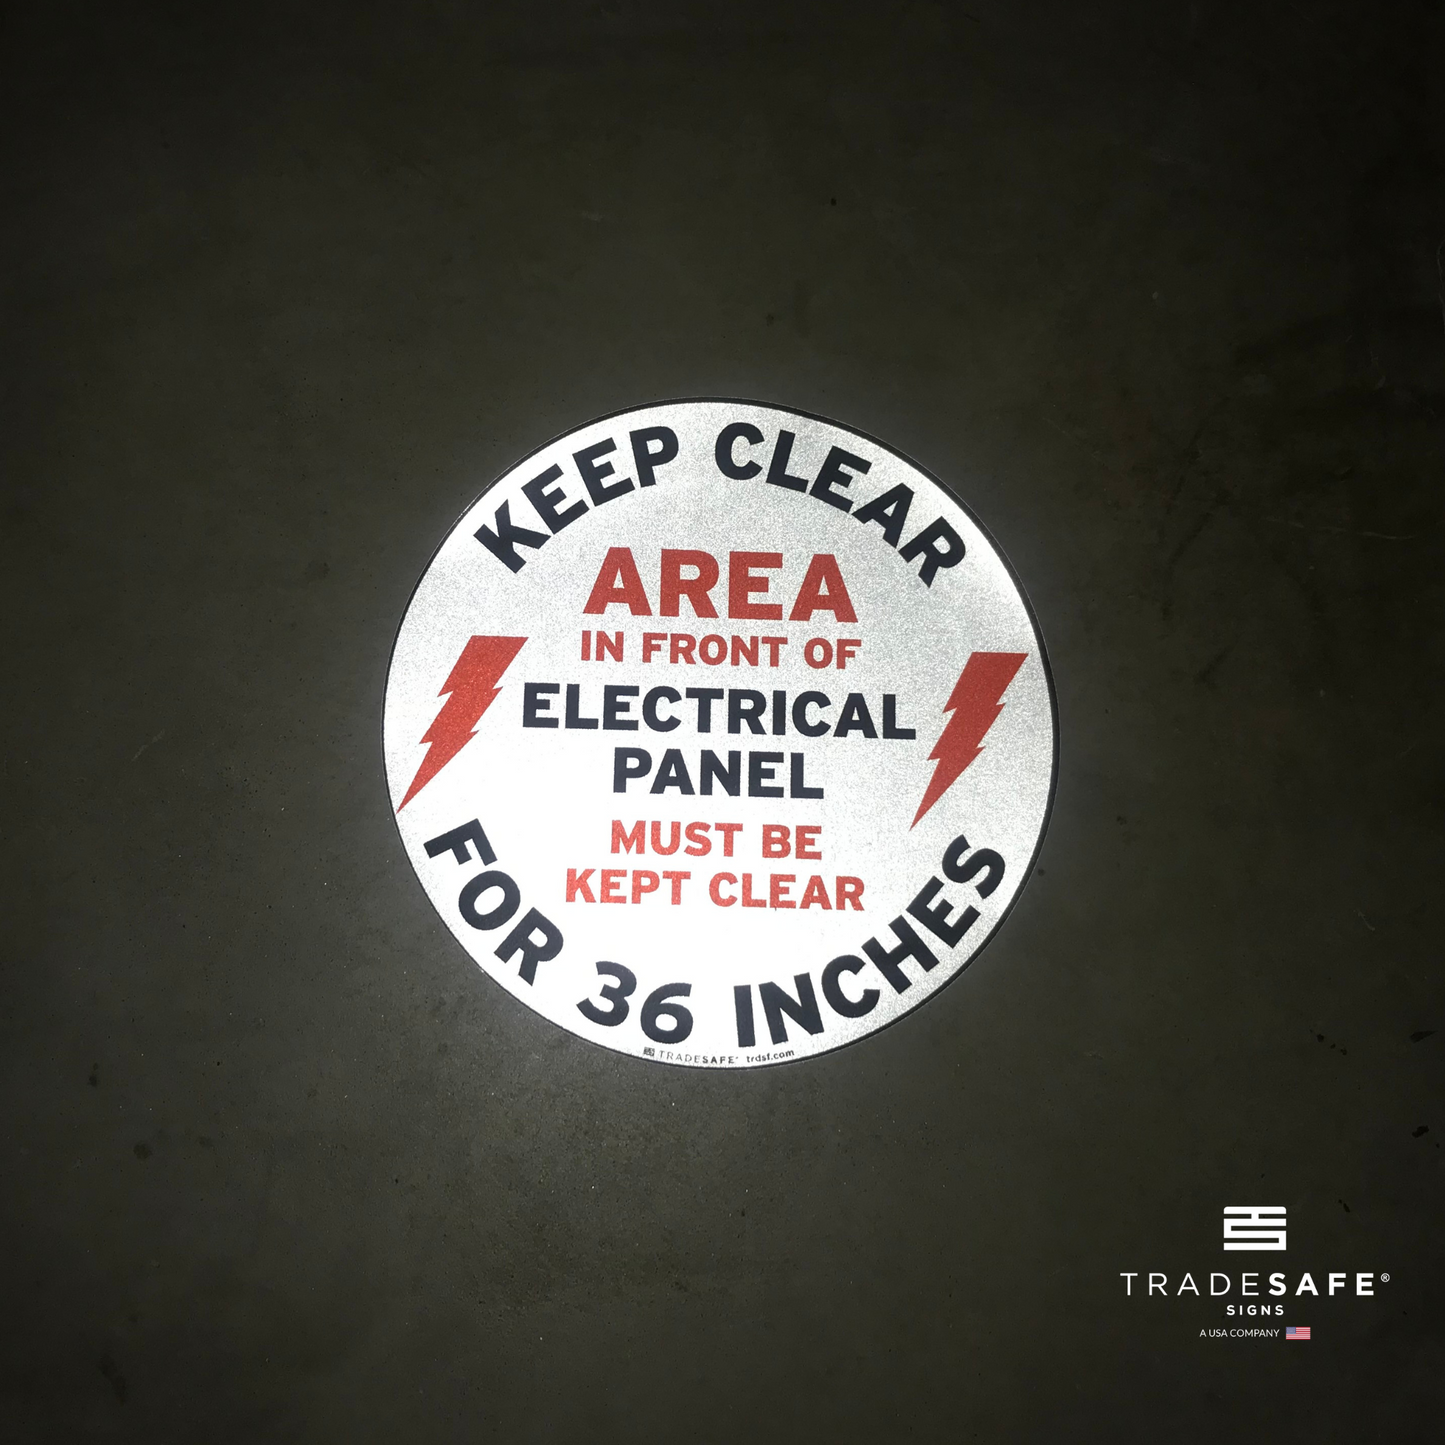 reflective attribute of keep clear electrical panel sign on black background